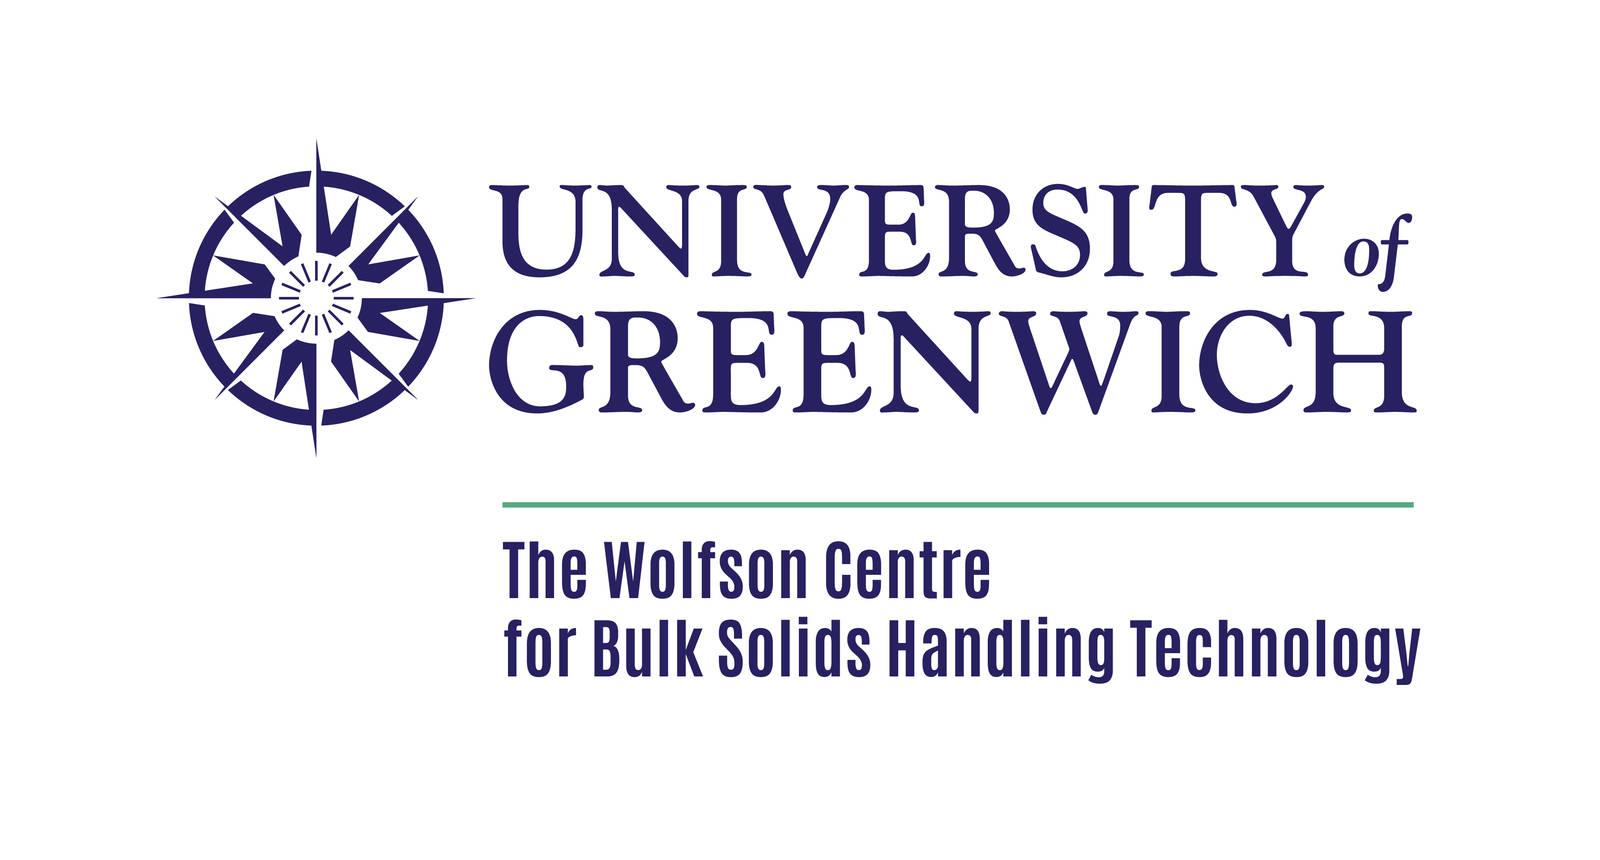 Updated website - for all your bulk solids handling requirements The Wolfson Centre for Bulk Solids Handling Technology